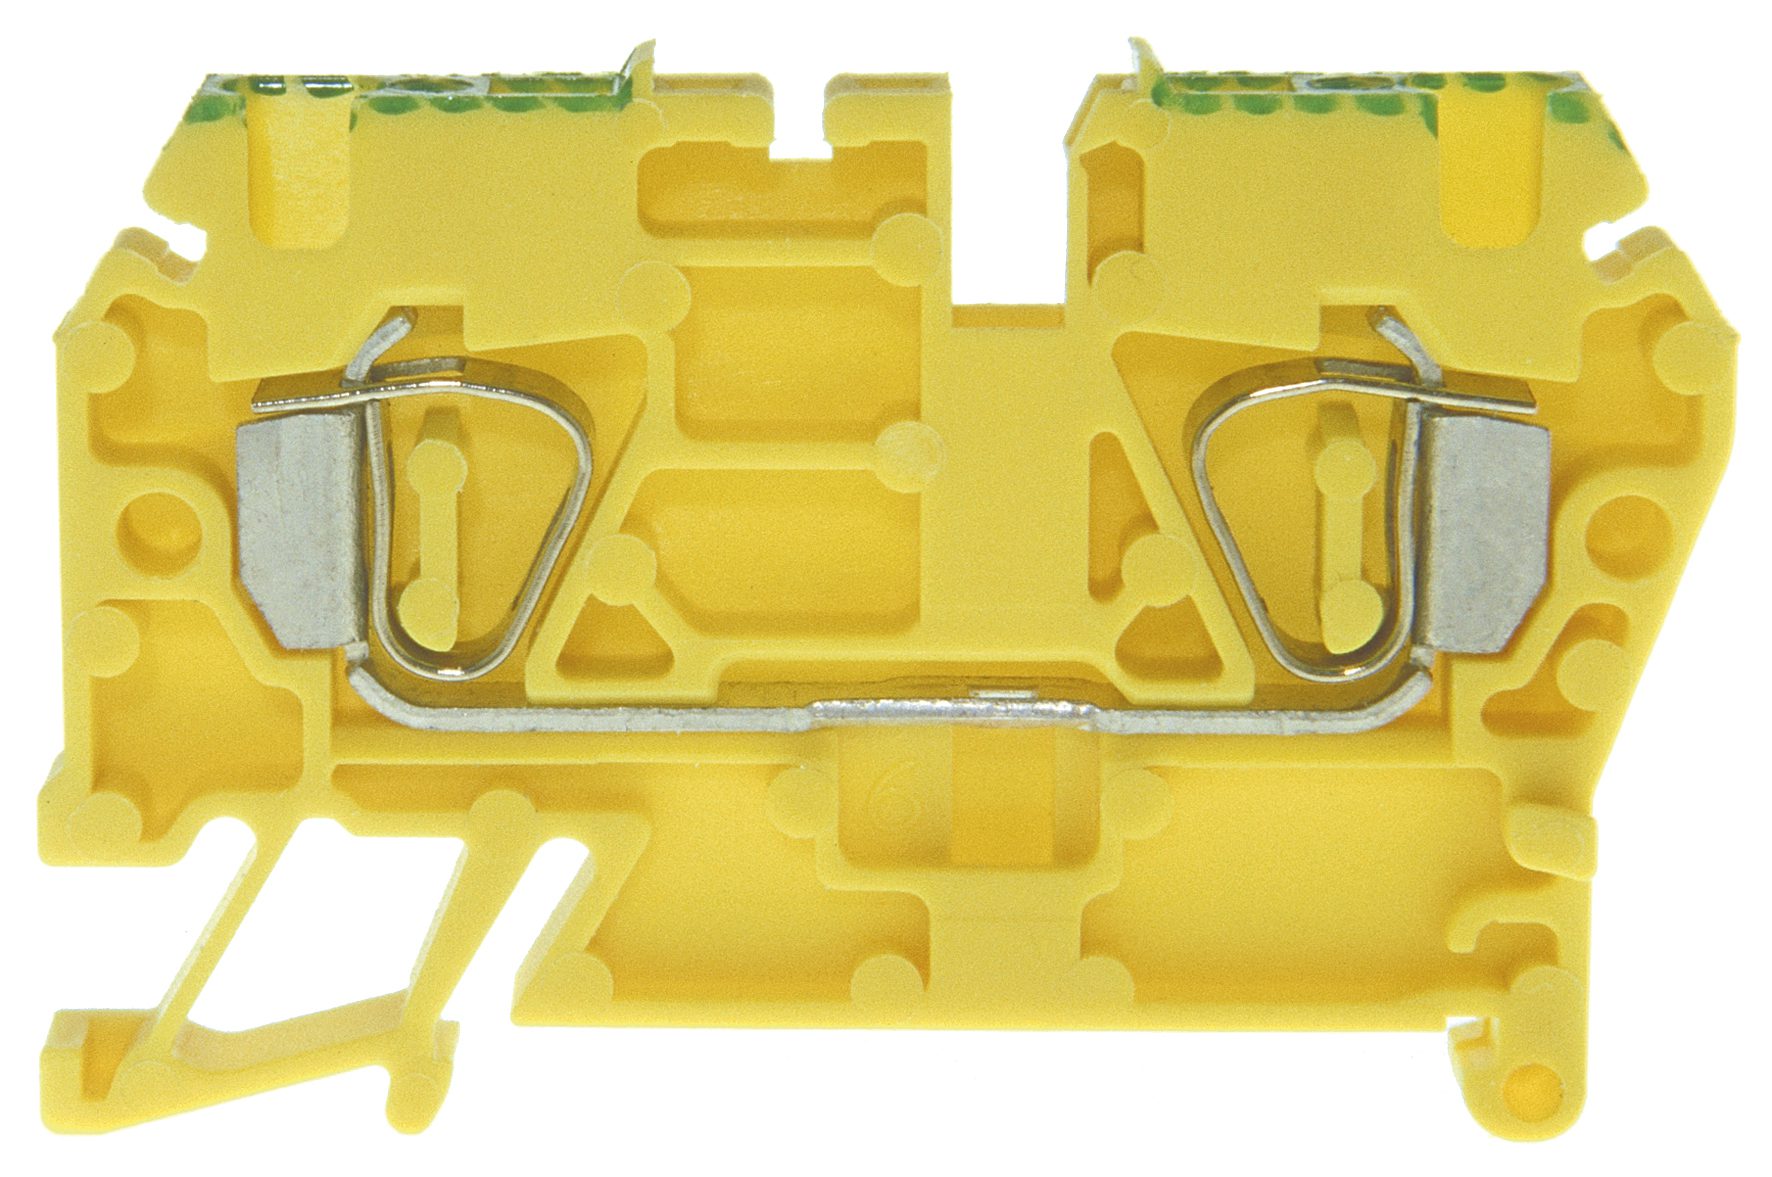 Tension clamp terminal DIN35 2.5mm² green/yellow